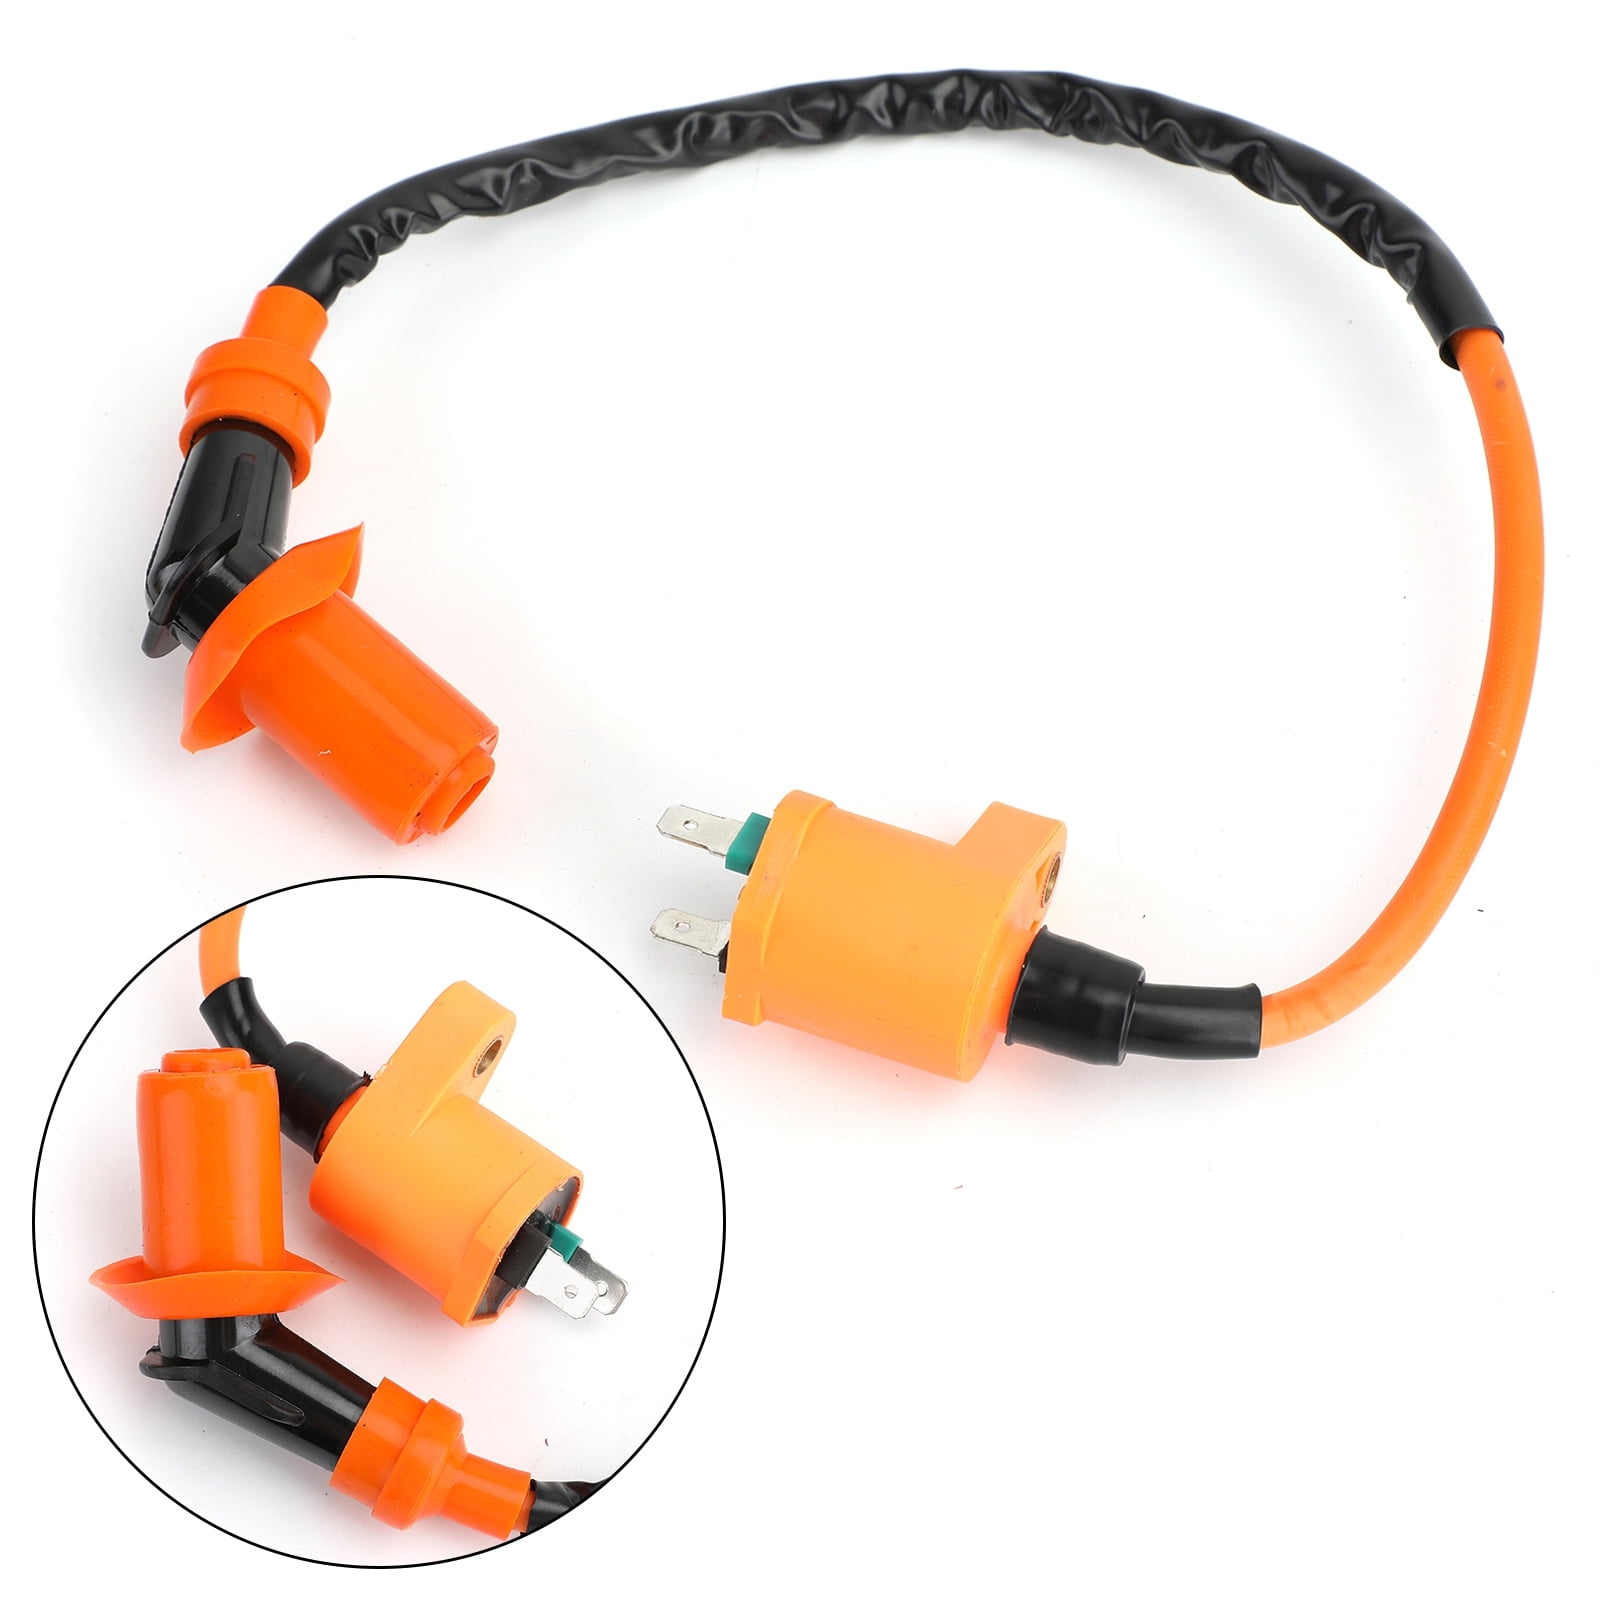 Mx-M Ignition Coil for 139QMB 152QMB GY6 50cc 125cc 150cc Engine ATV Go Kart Moped Scooter